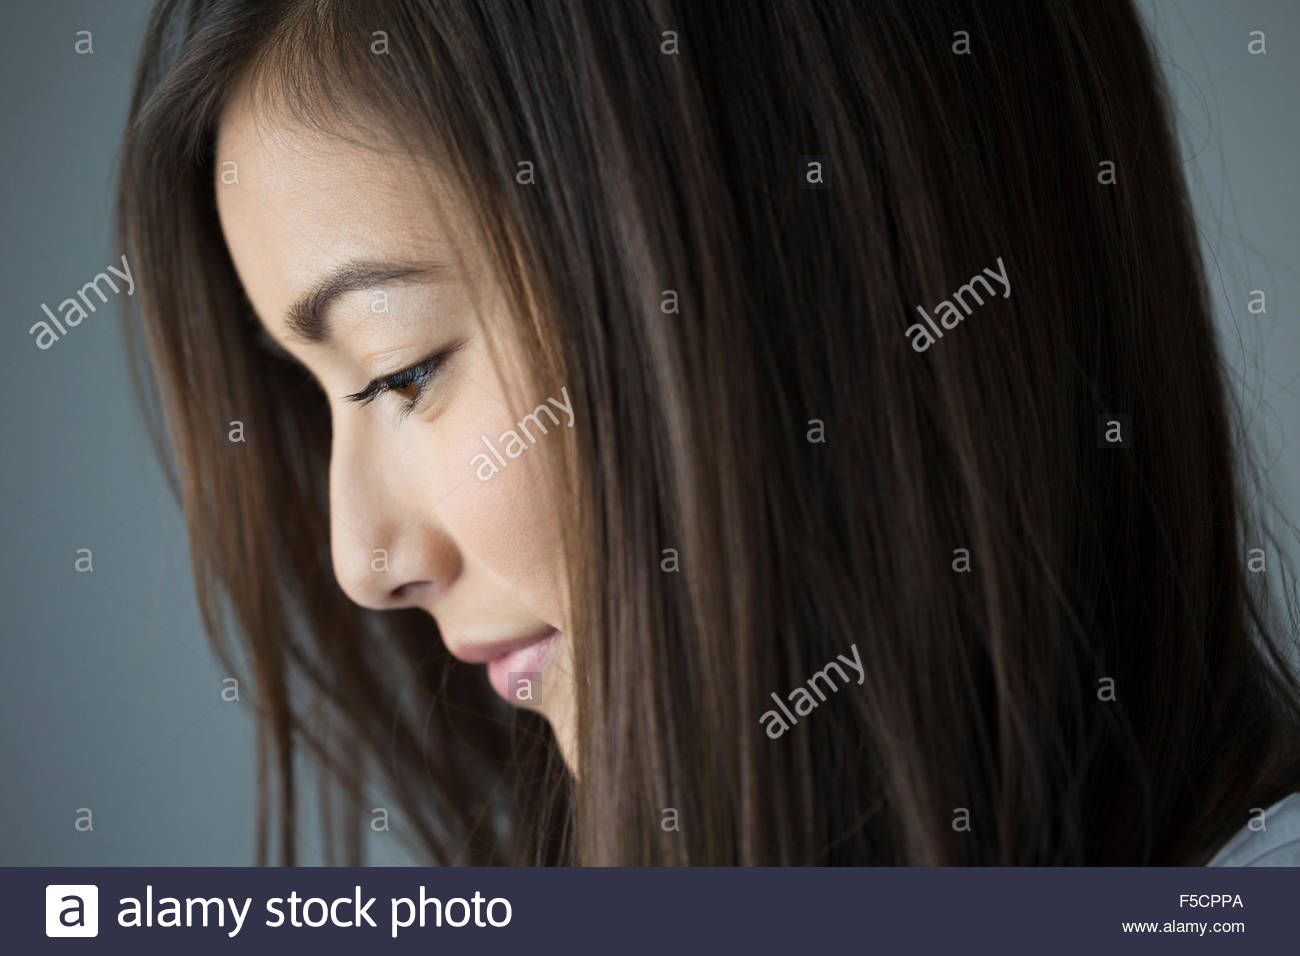 Close up profile pensive brunette woman looking down Stock Photo